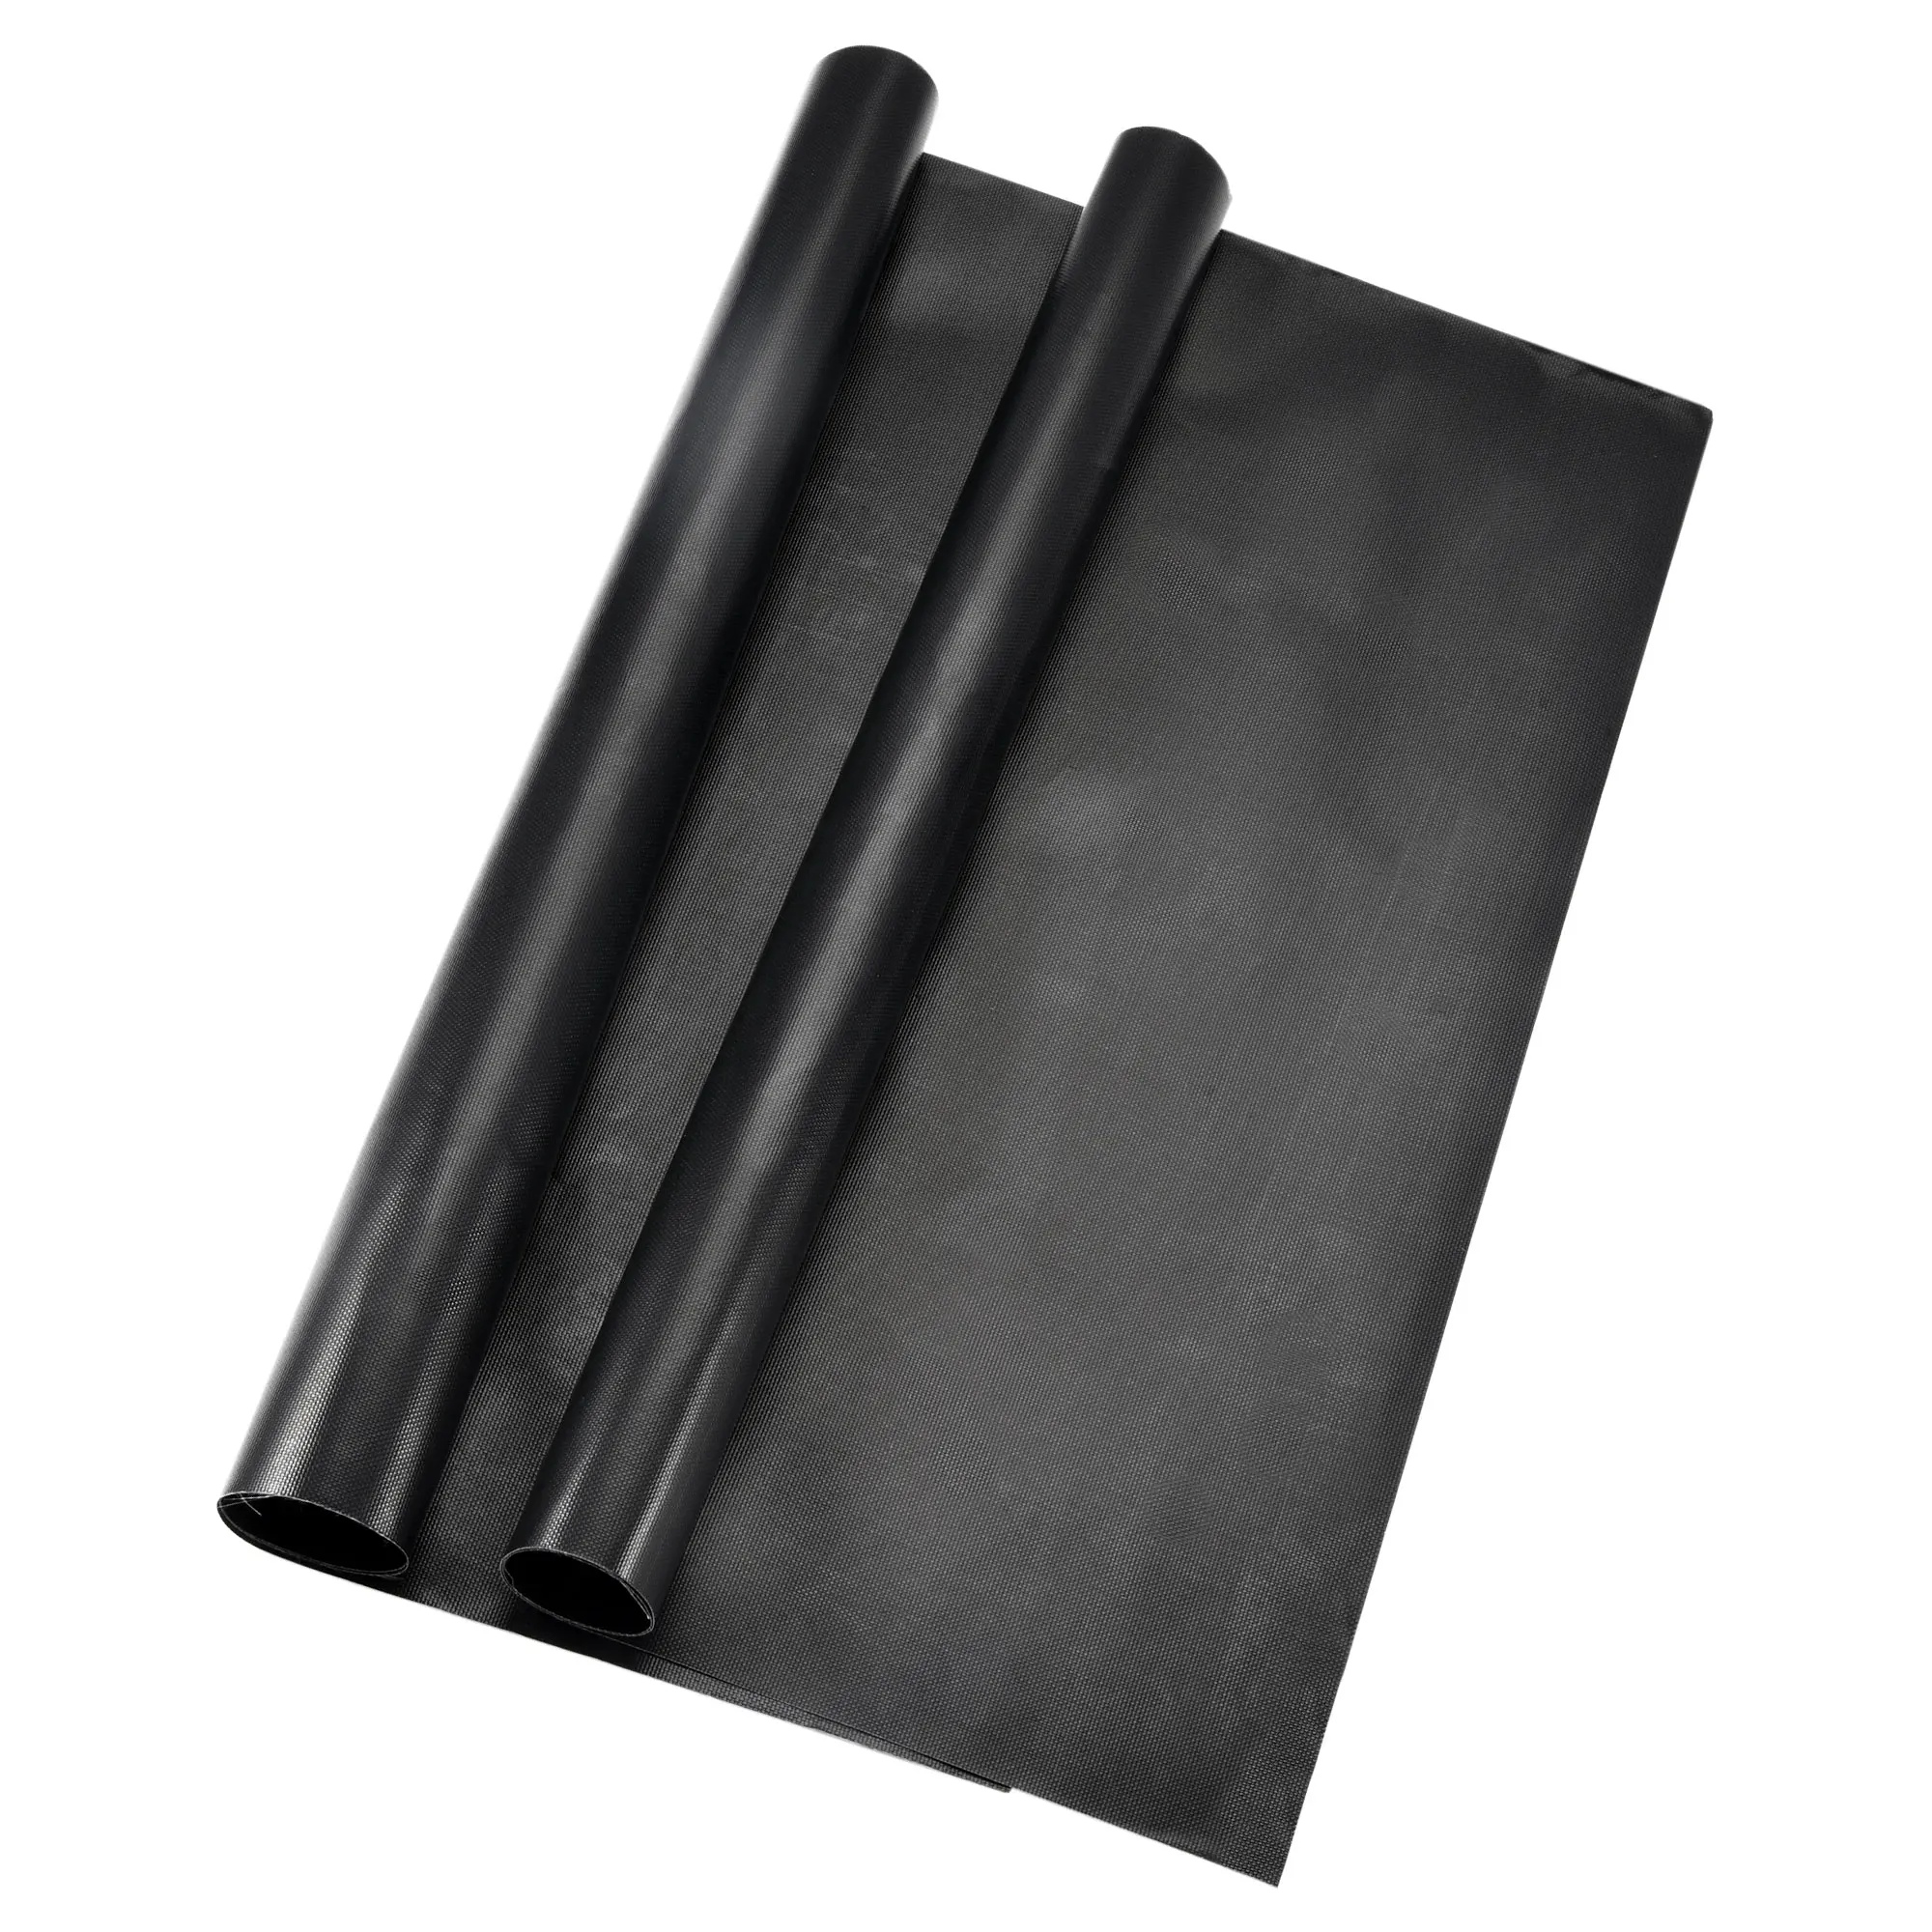 

Uxcell 420x800mm Non-Stick Stove Covers, Clean Mat Pad Range Protectors Liner Covers PTFE Sheet Black 4 Pcs